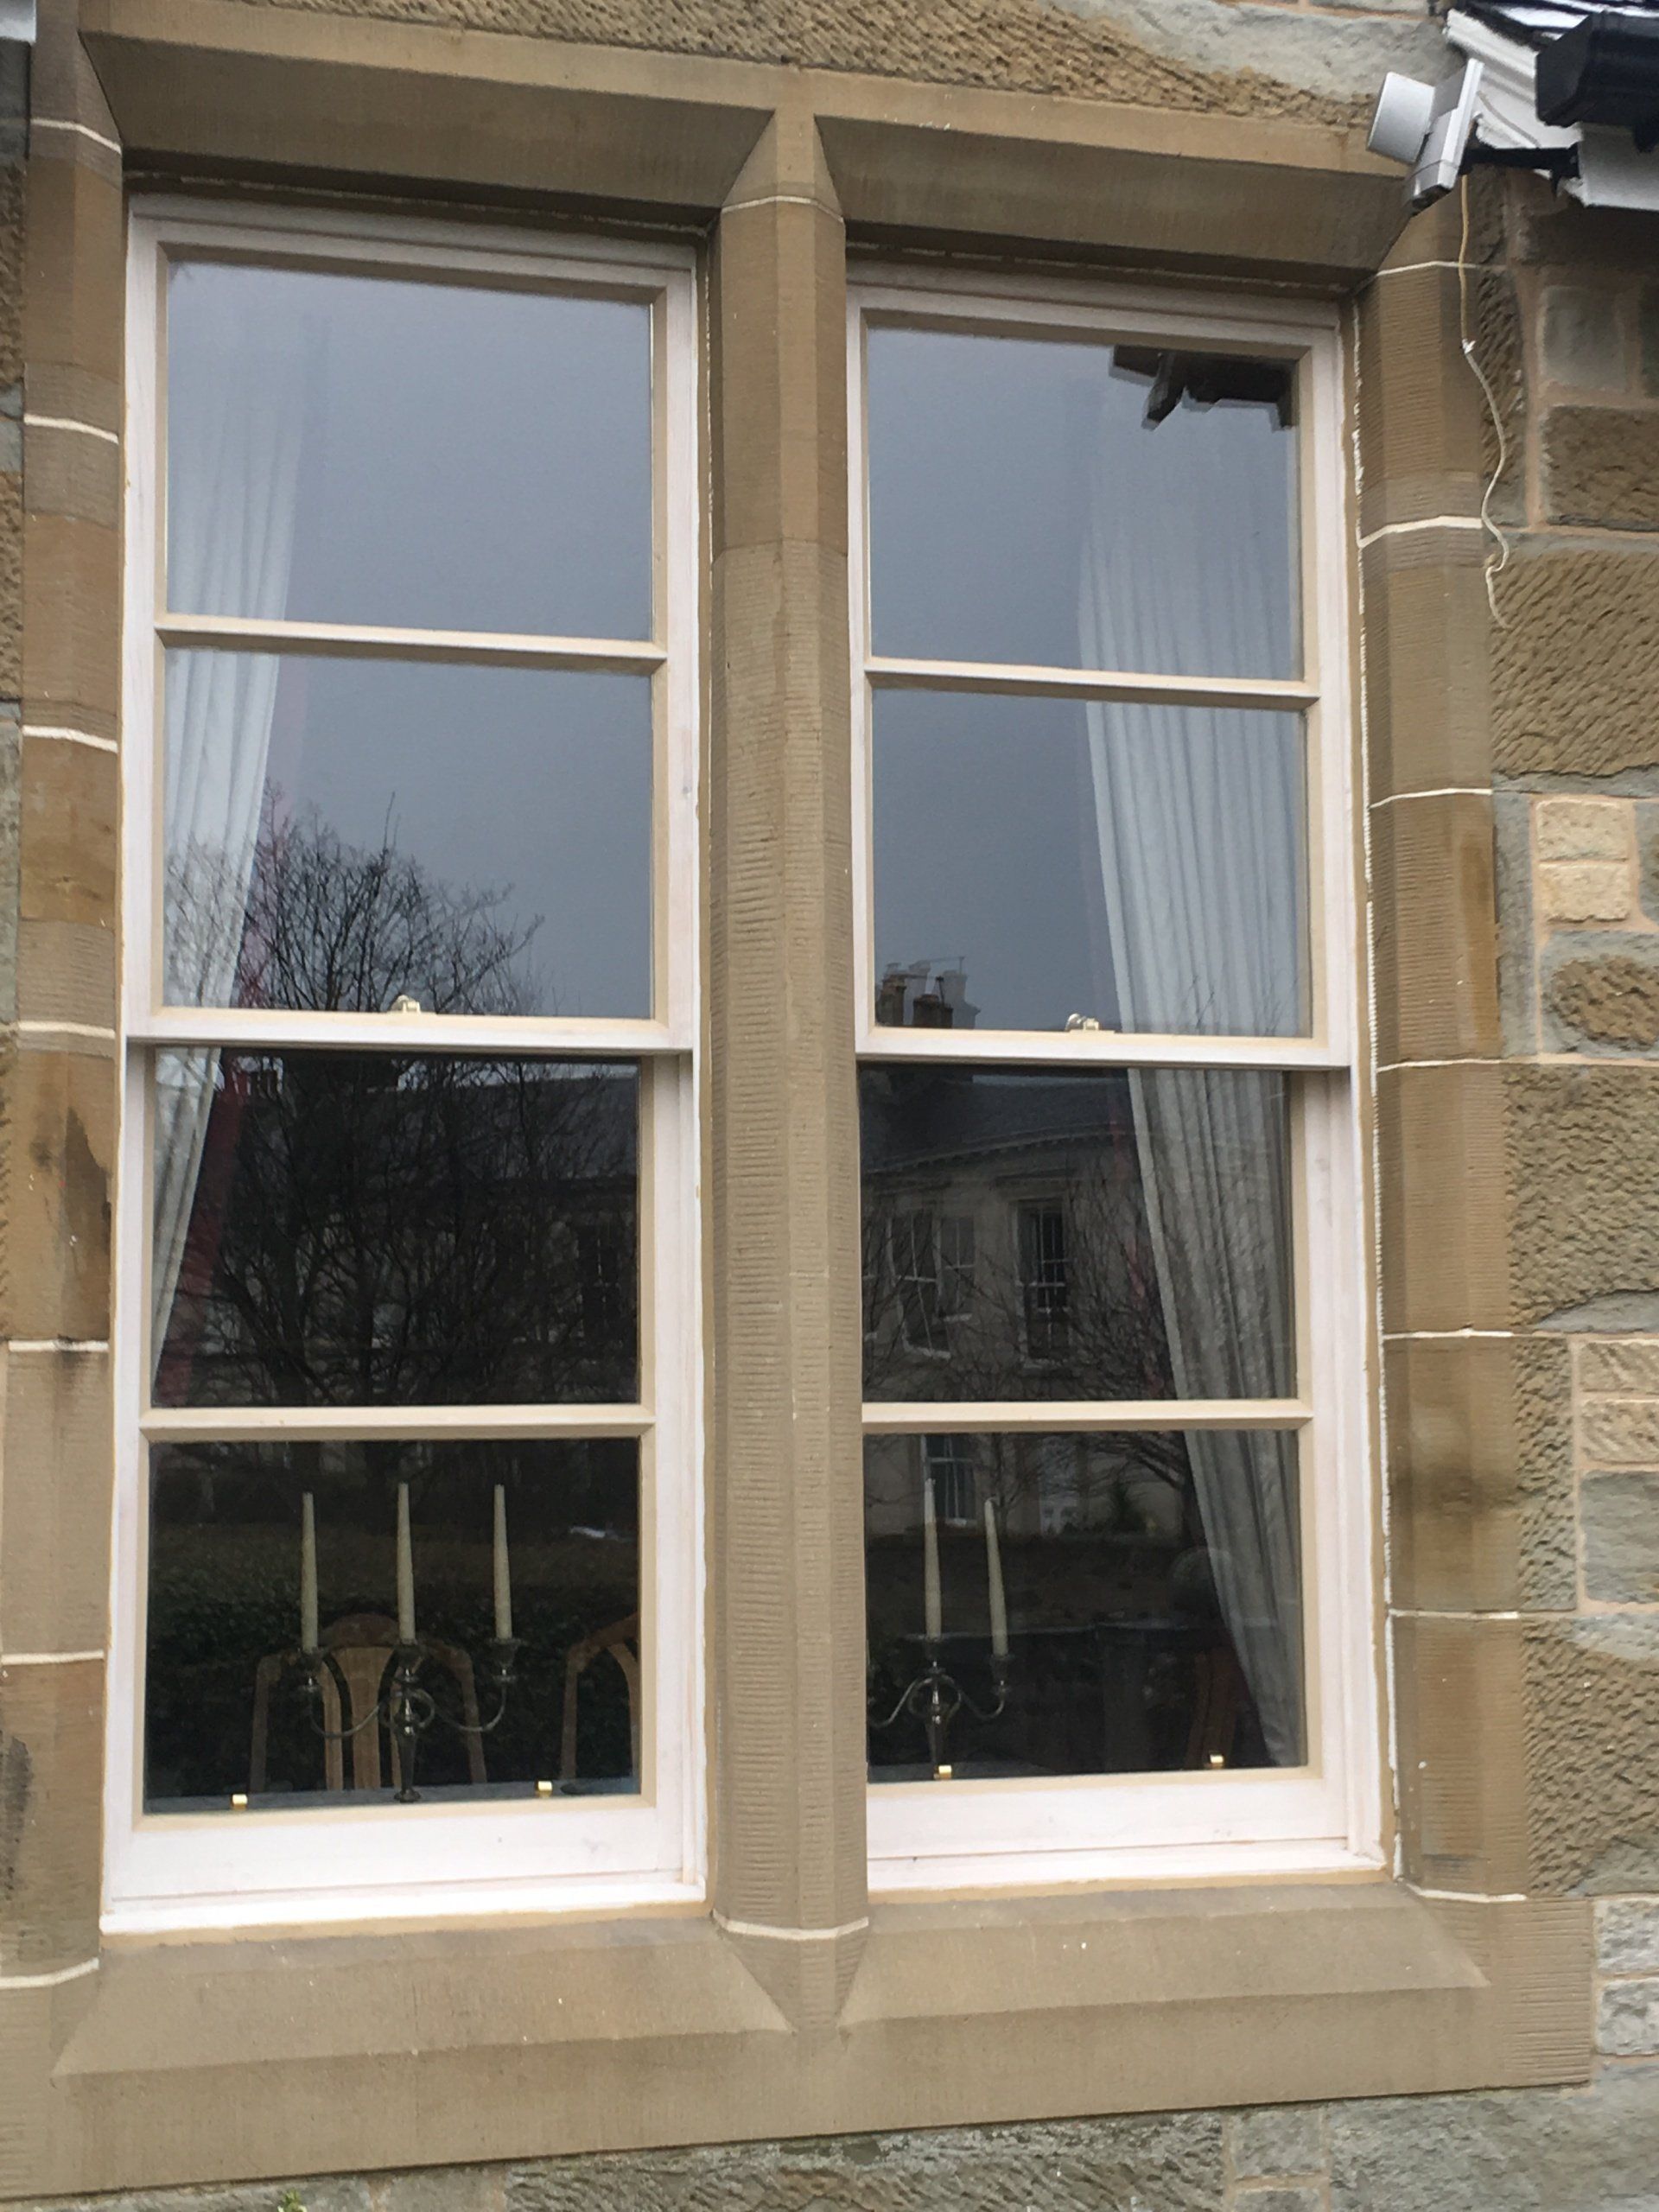 We specialise in sash window repairs and upgrades